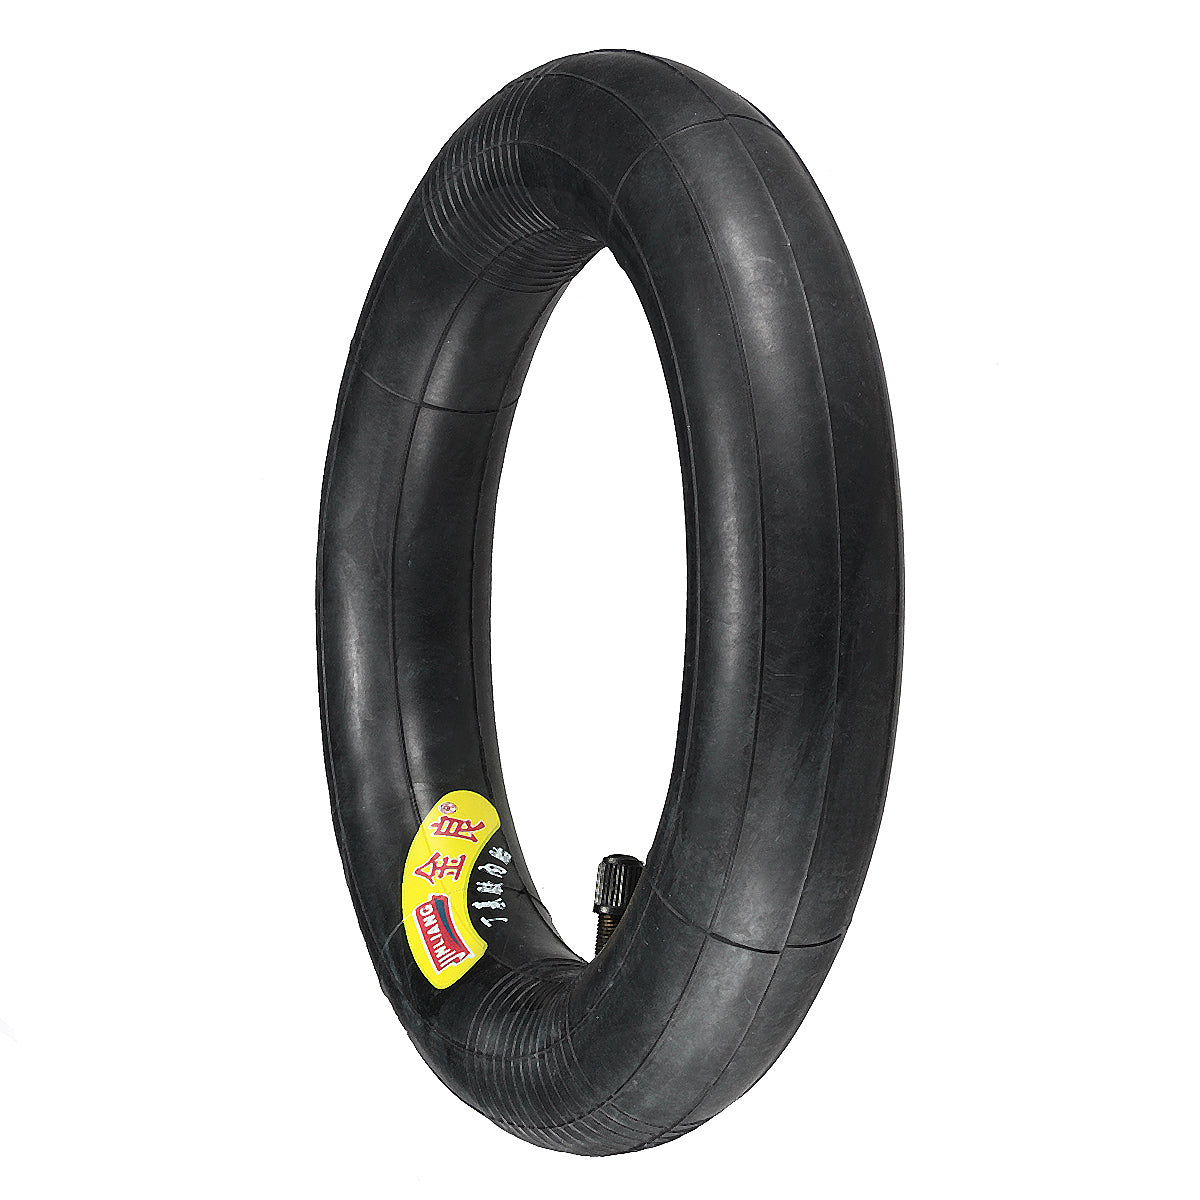 8.5" Thicken Rubber Solid Tire Wheels Inner Tube For M365 Electric Scooter - Auto GoShop